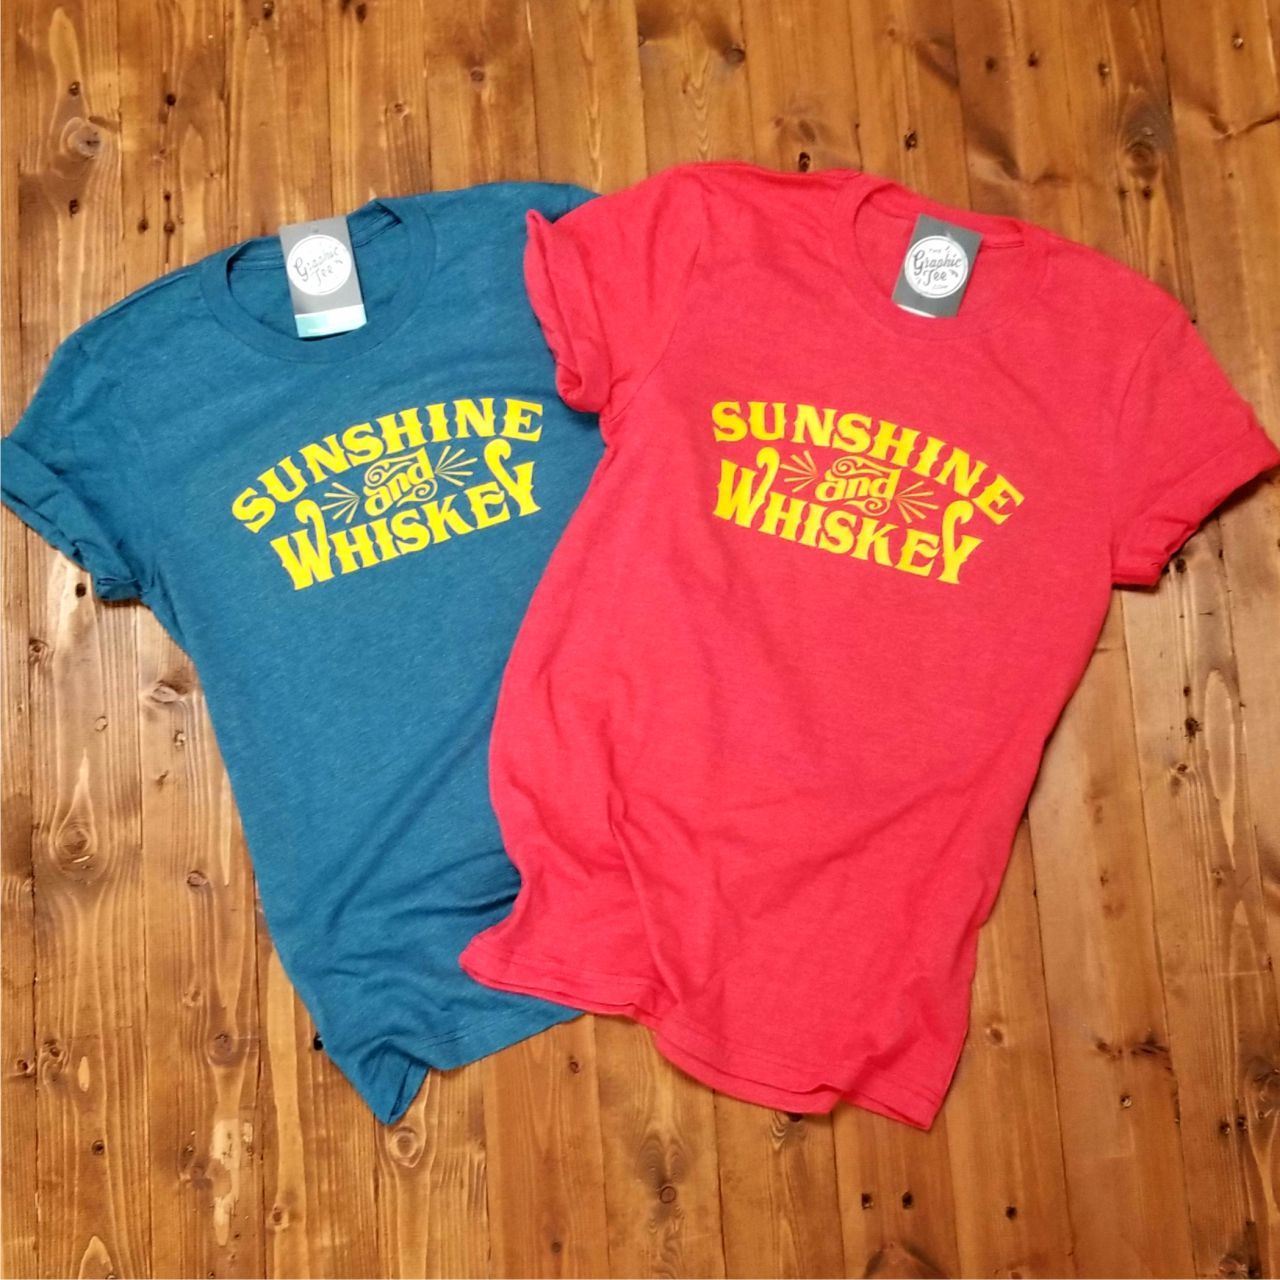 Sunshine and Whiskey - Unisex Tee - The Graphic Tee